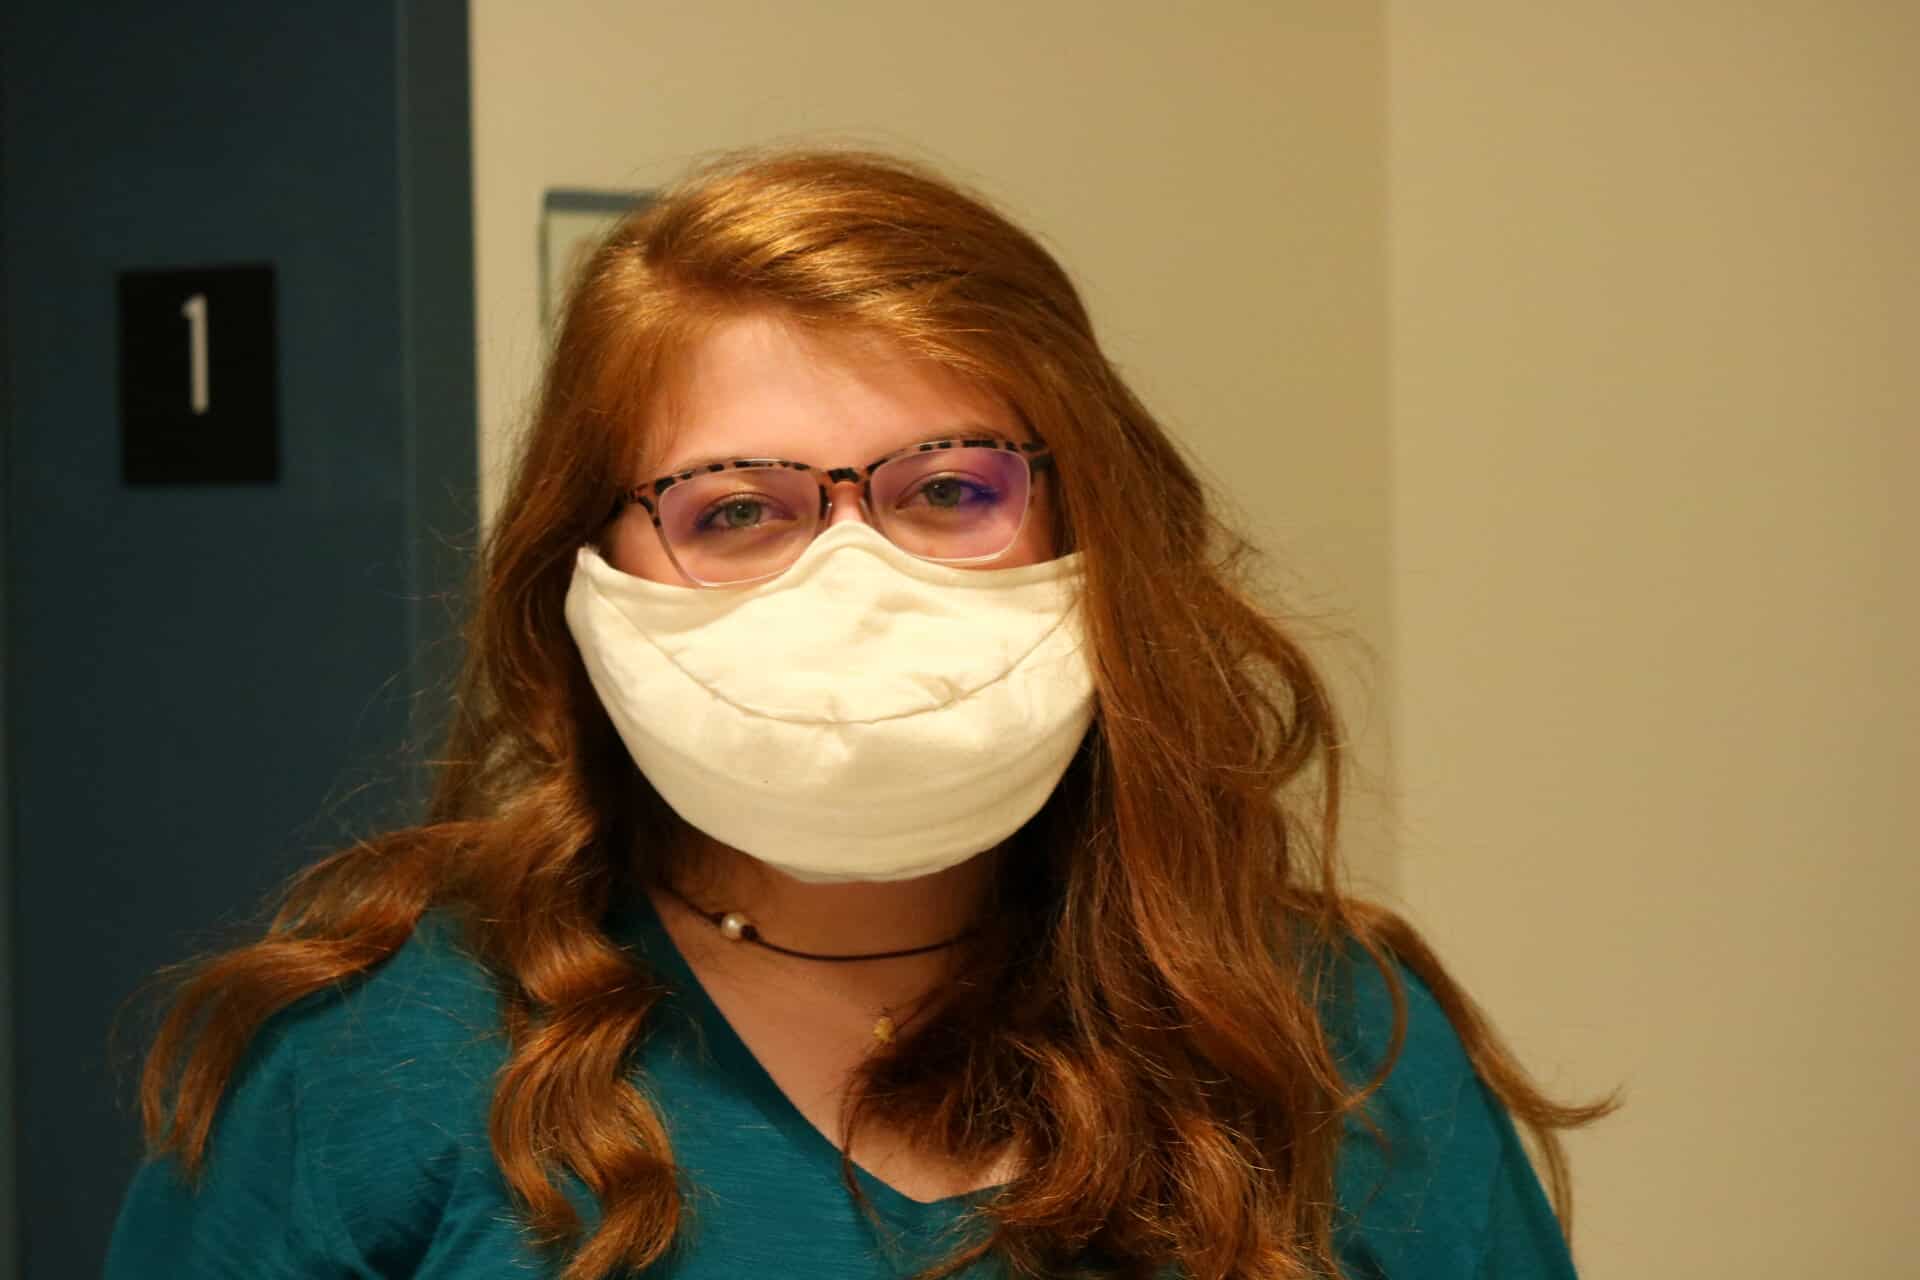 Elizabeth Morris, sophomore, is a Secondary Music Education major. The mask she is wearing is designed for singers to allow for more breath and is used for the North Greenville University Choir.